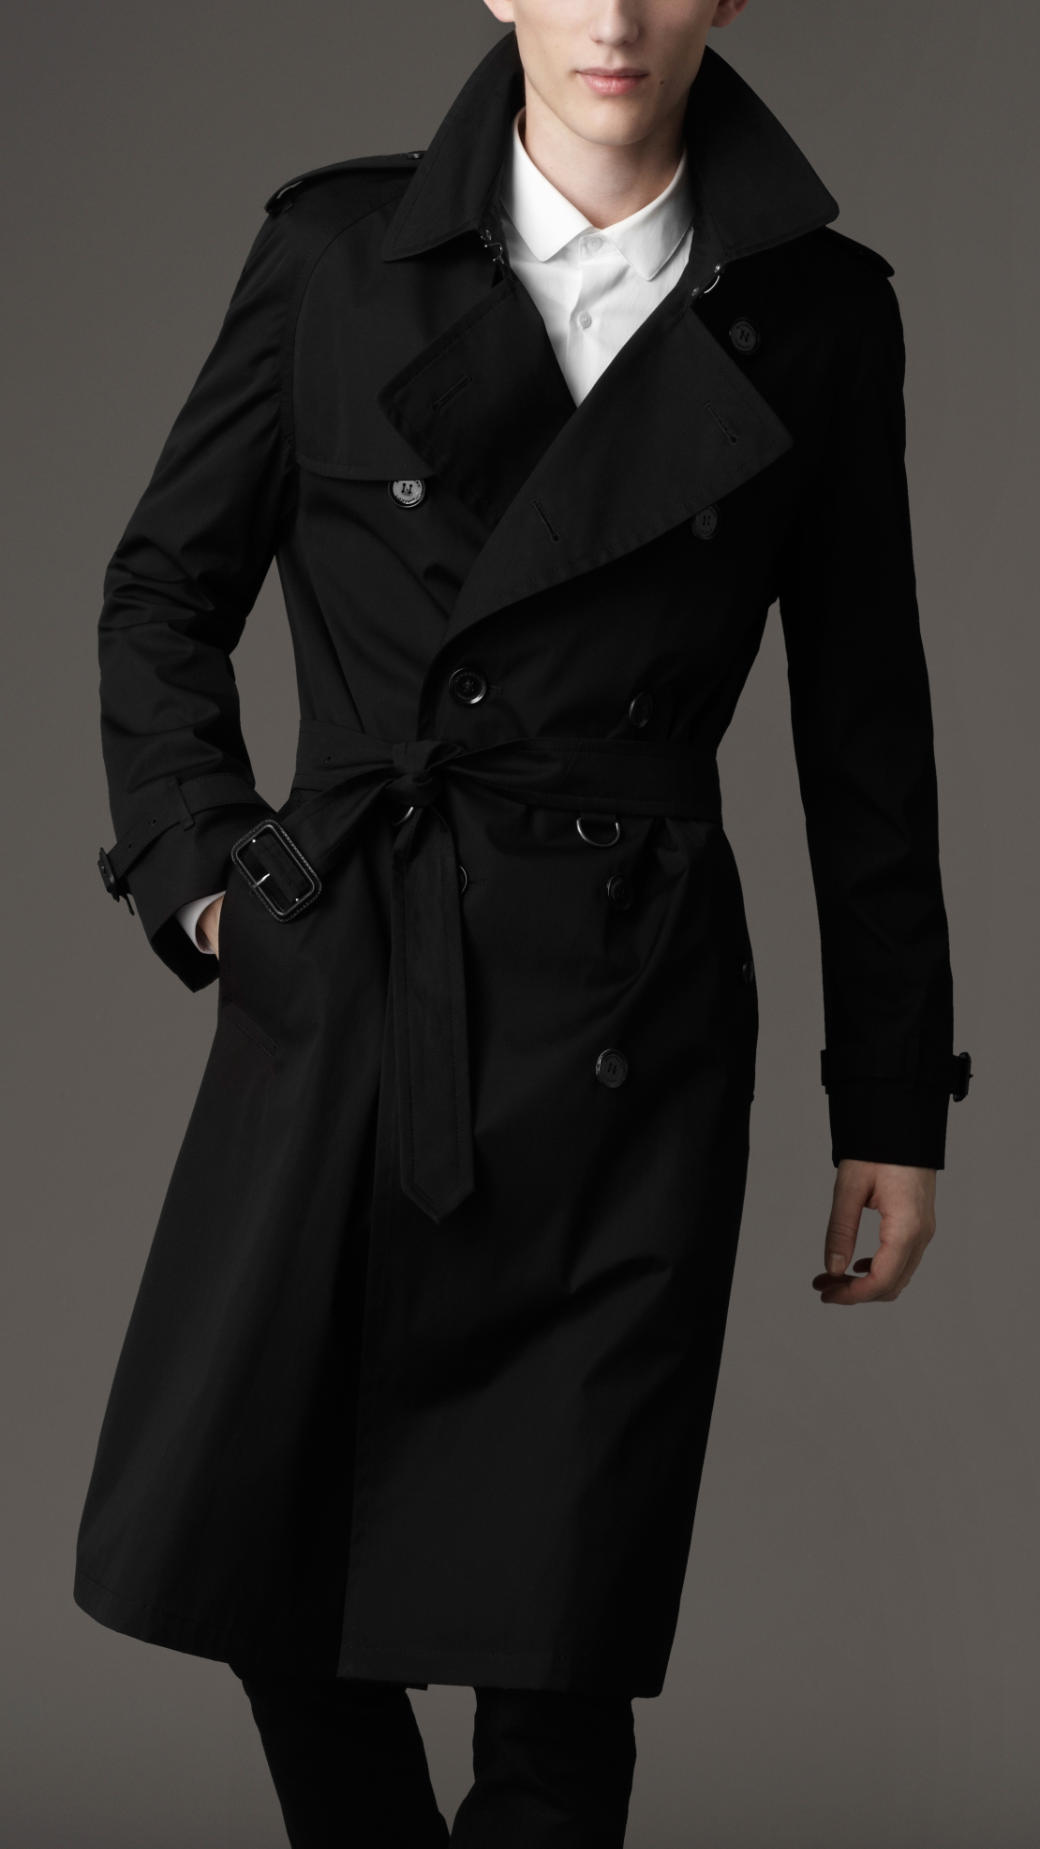 Burberry Cotton Long Back Pleat Trench Coat in Black for Men - Lyst